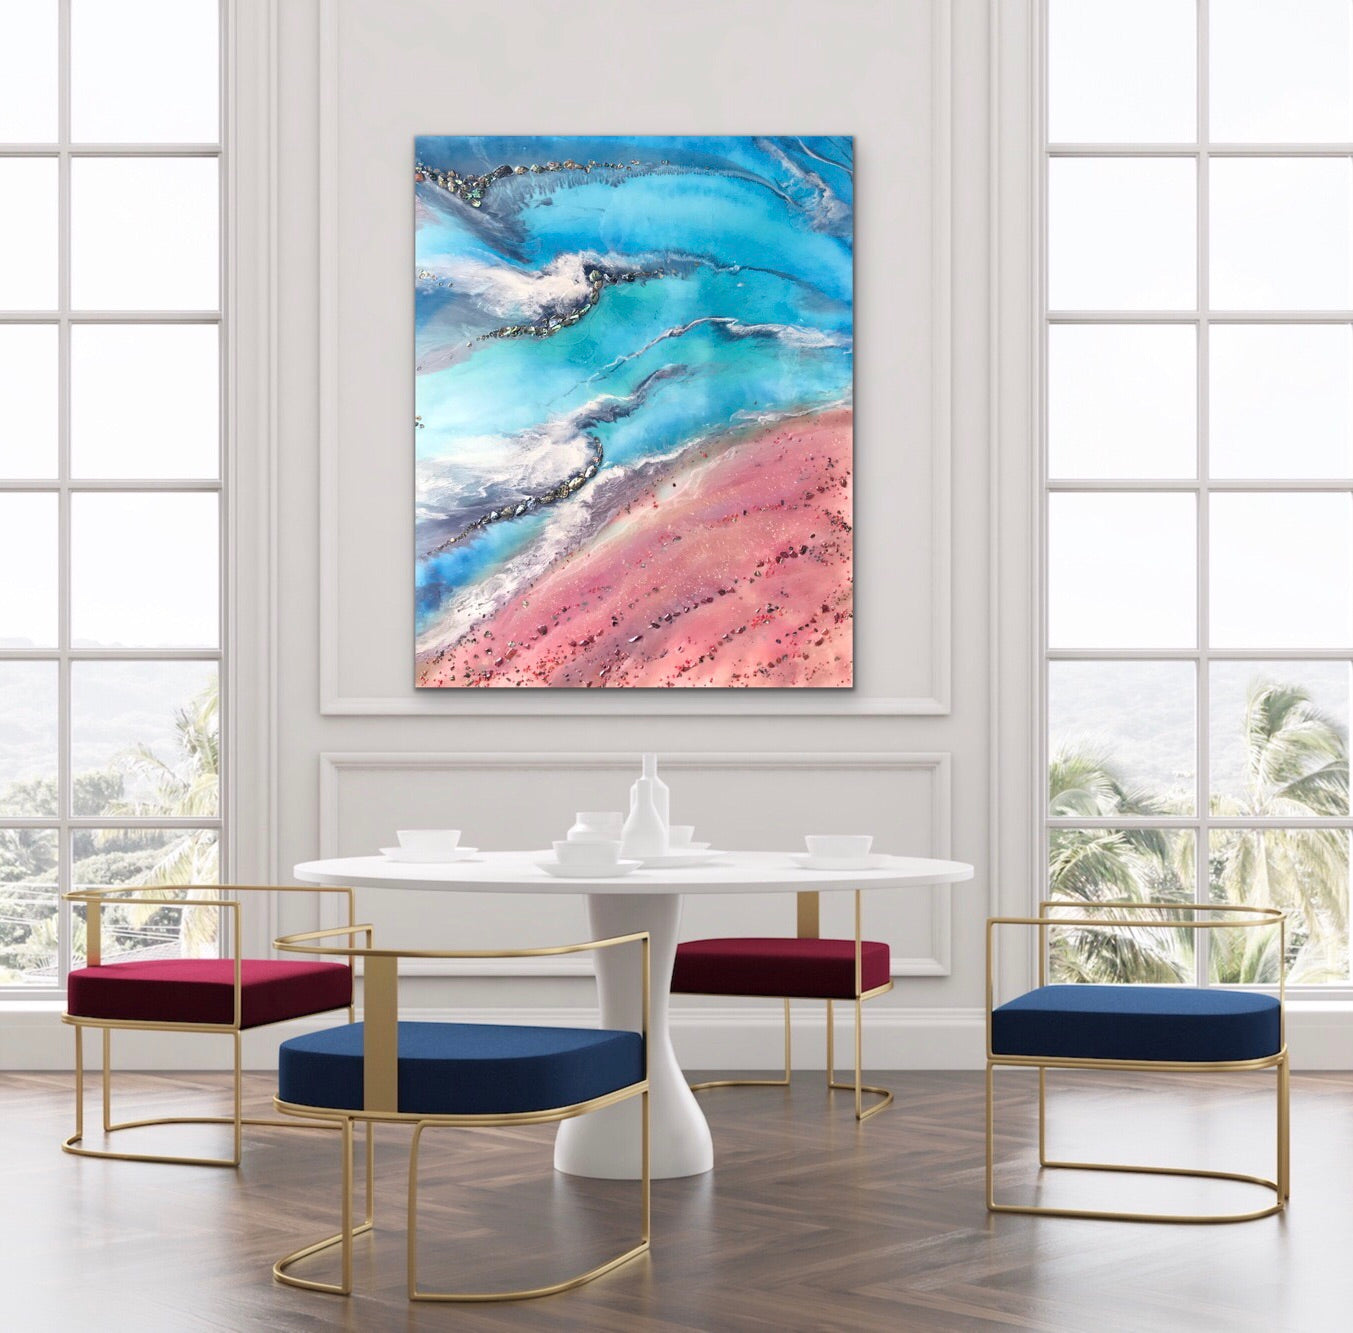 Teal and Pink Ocean Painting. Abstract Seascape Resin Artwork 5 Azure Coastline. Ocean. Original with Abalone Shells Coral 120x150cm.